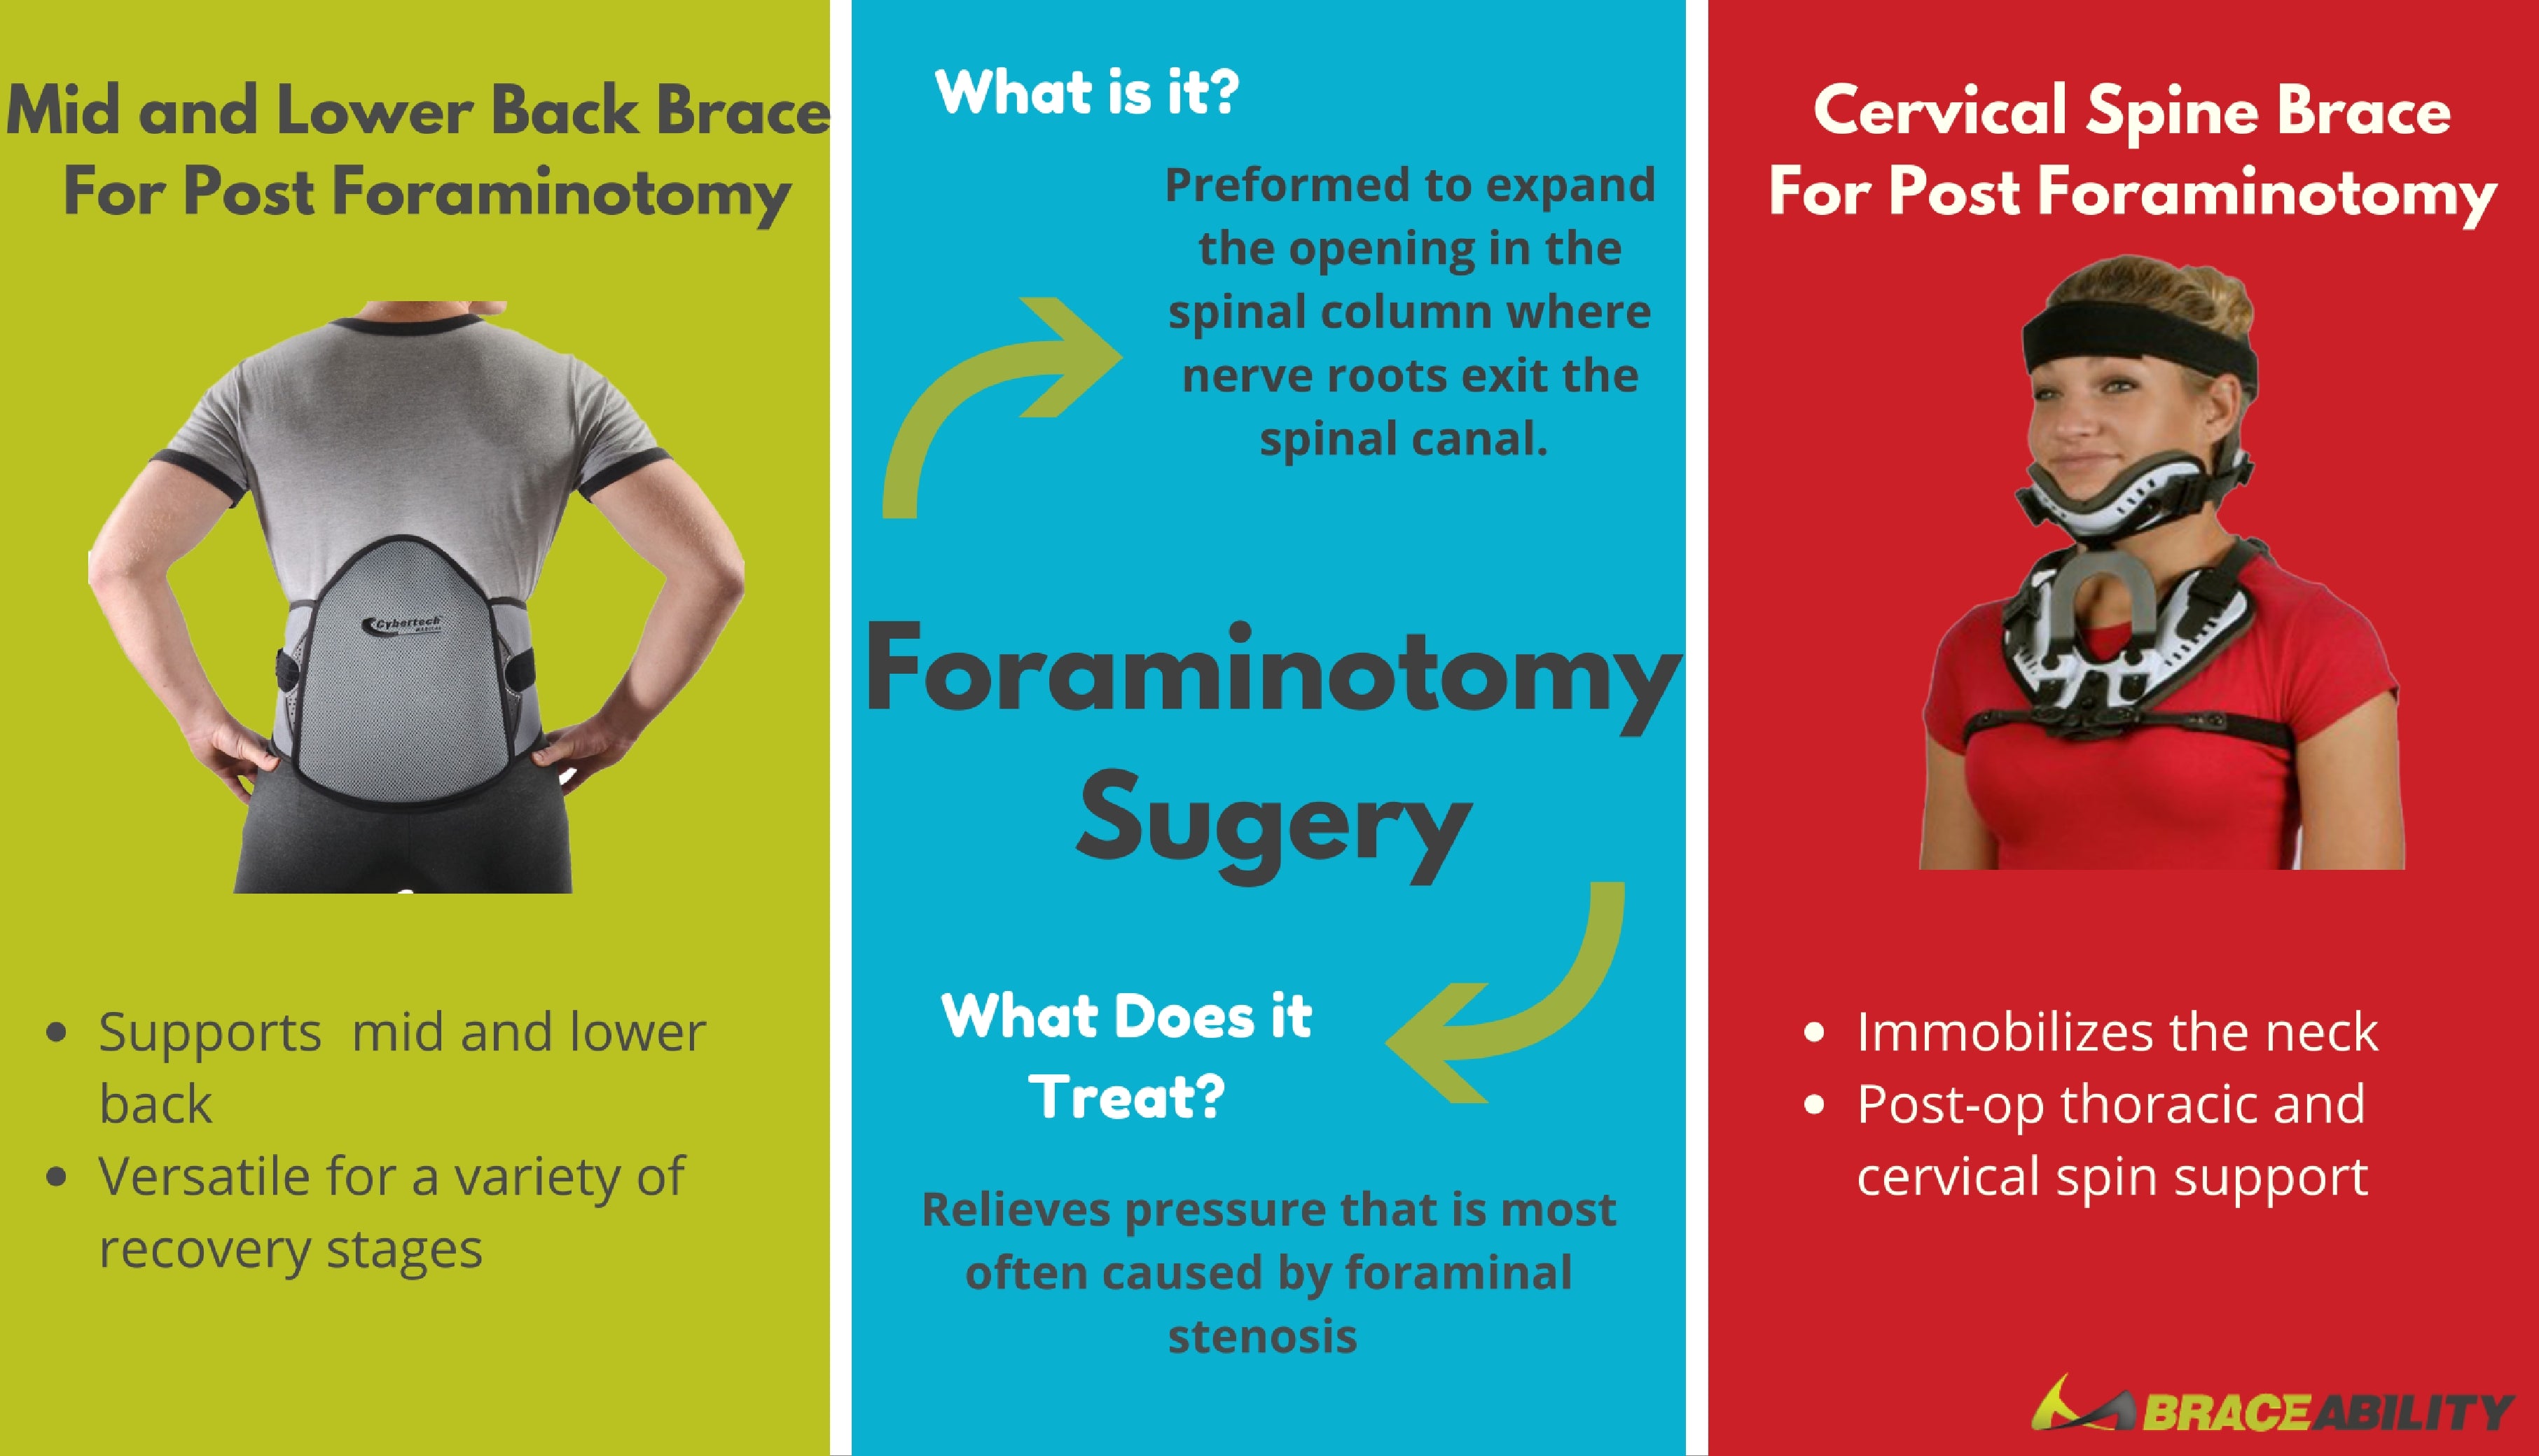 The best brace for post lumbar or cervical foraminotomy surgery